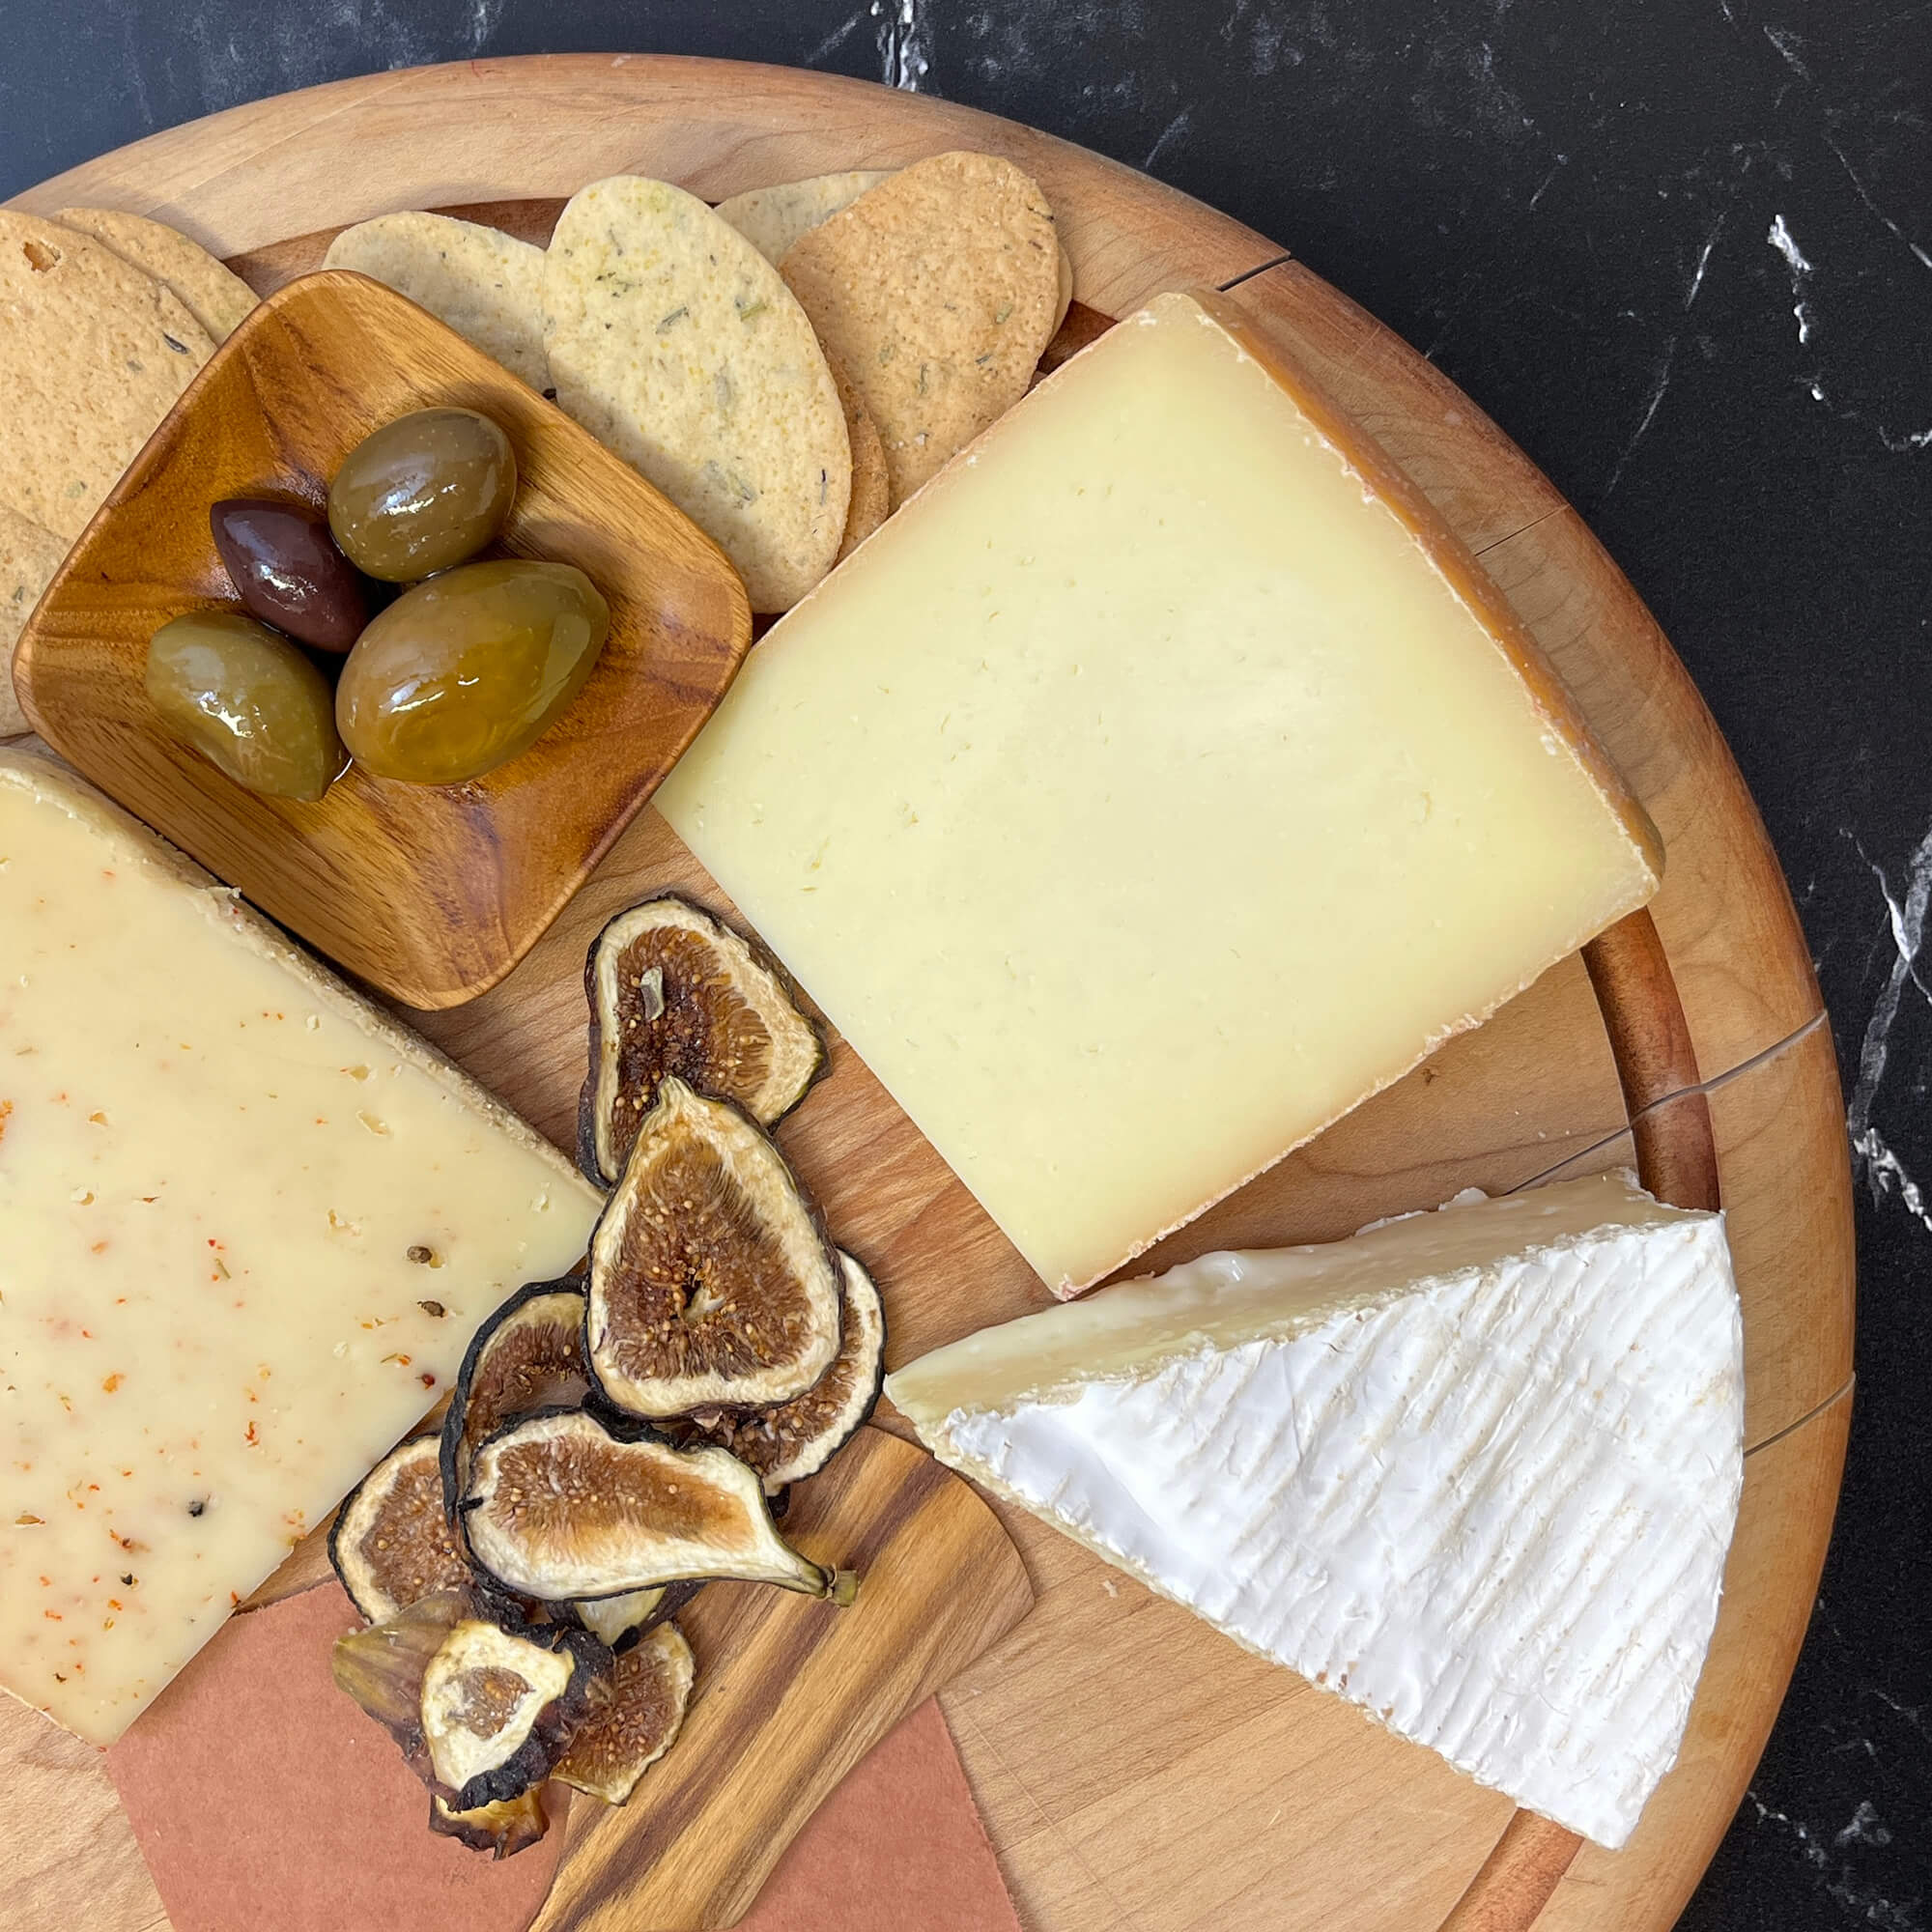 A spread of cheese, figs, olives, and crackers on a round wooden board.